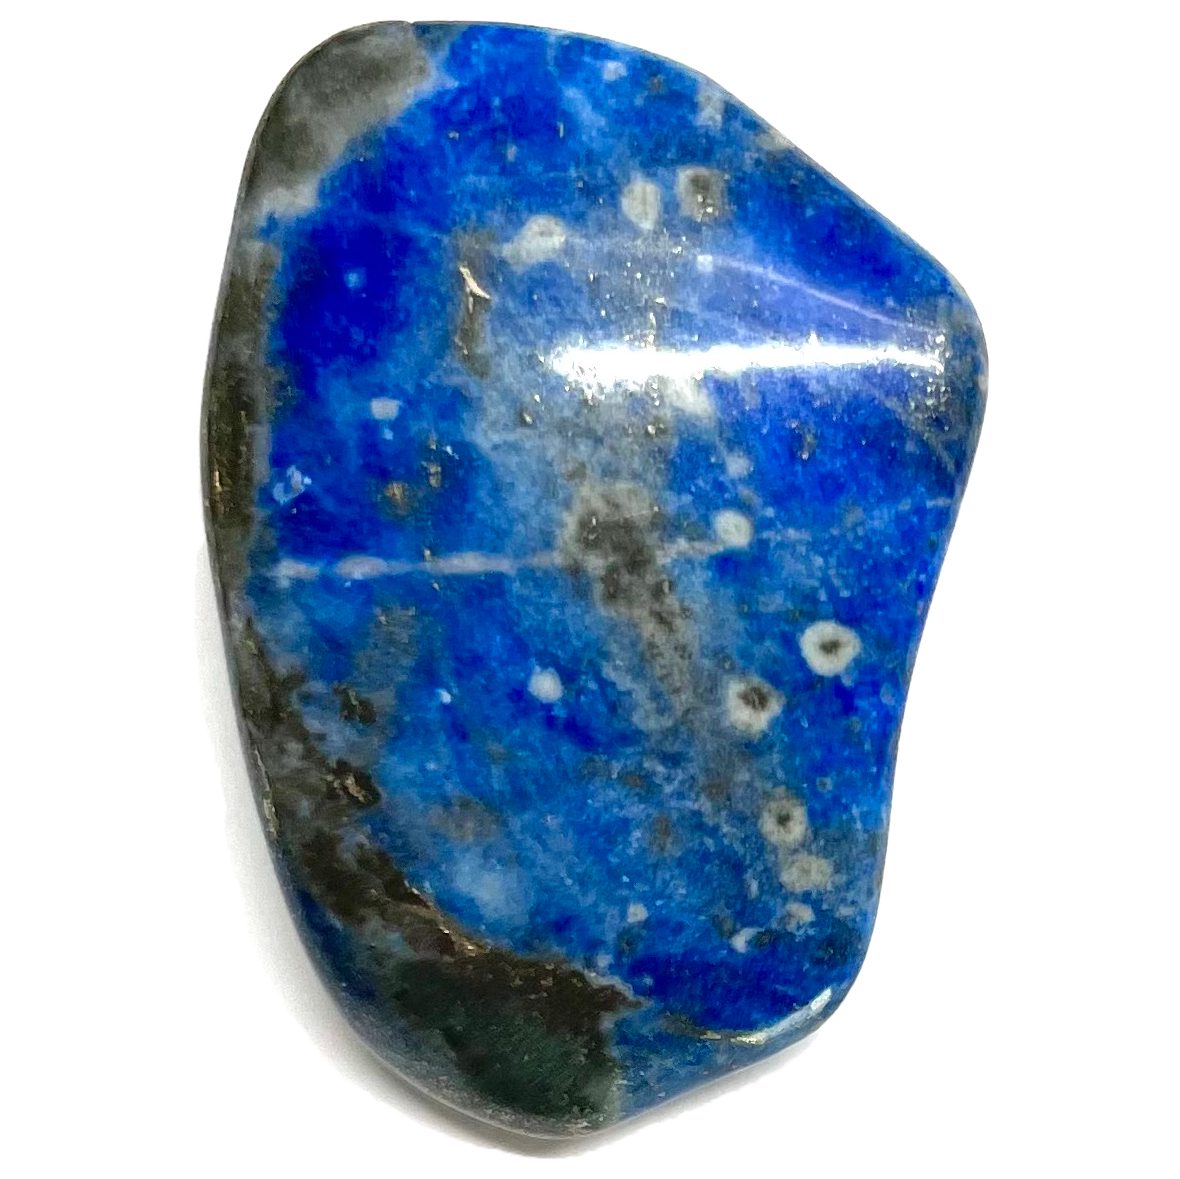 A tumbled lapis lazuli stone.  The material is dark blue with black matrix and golden pyrite speck inclusions.